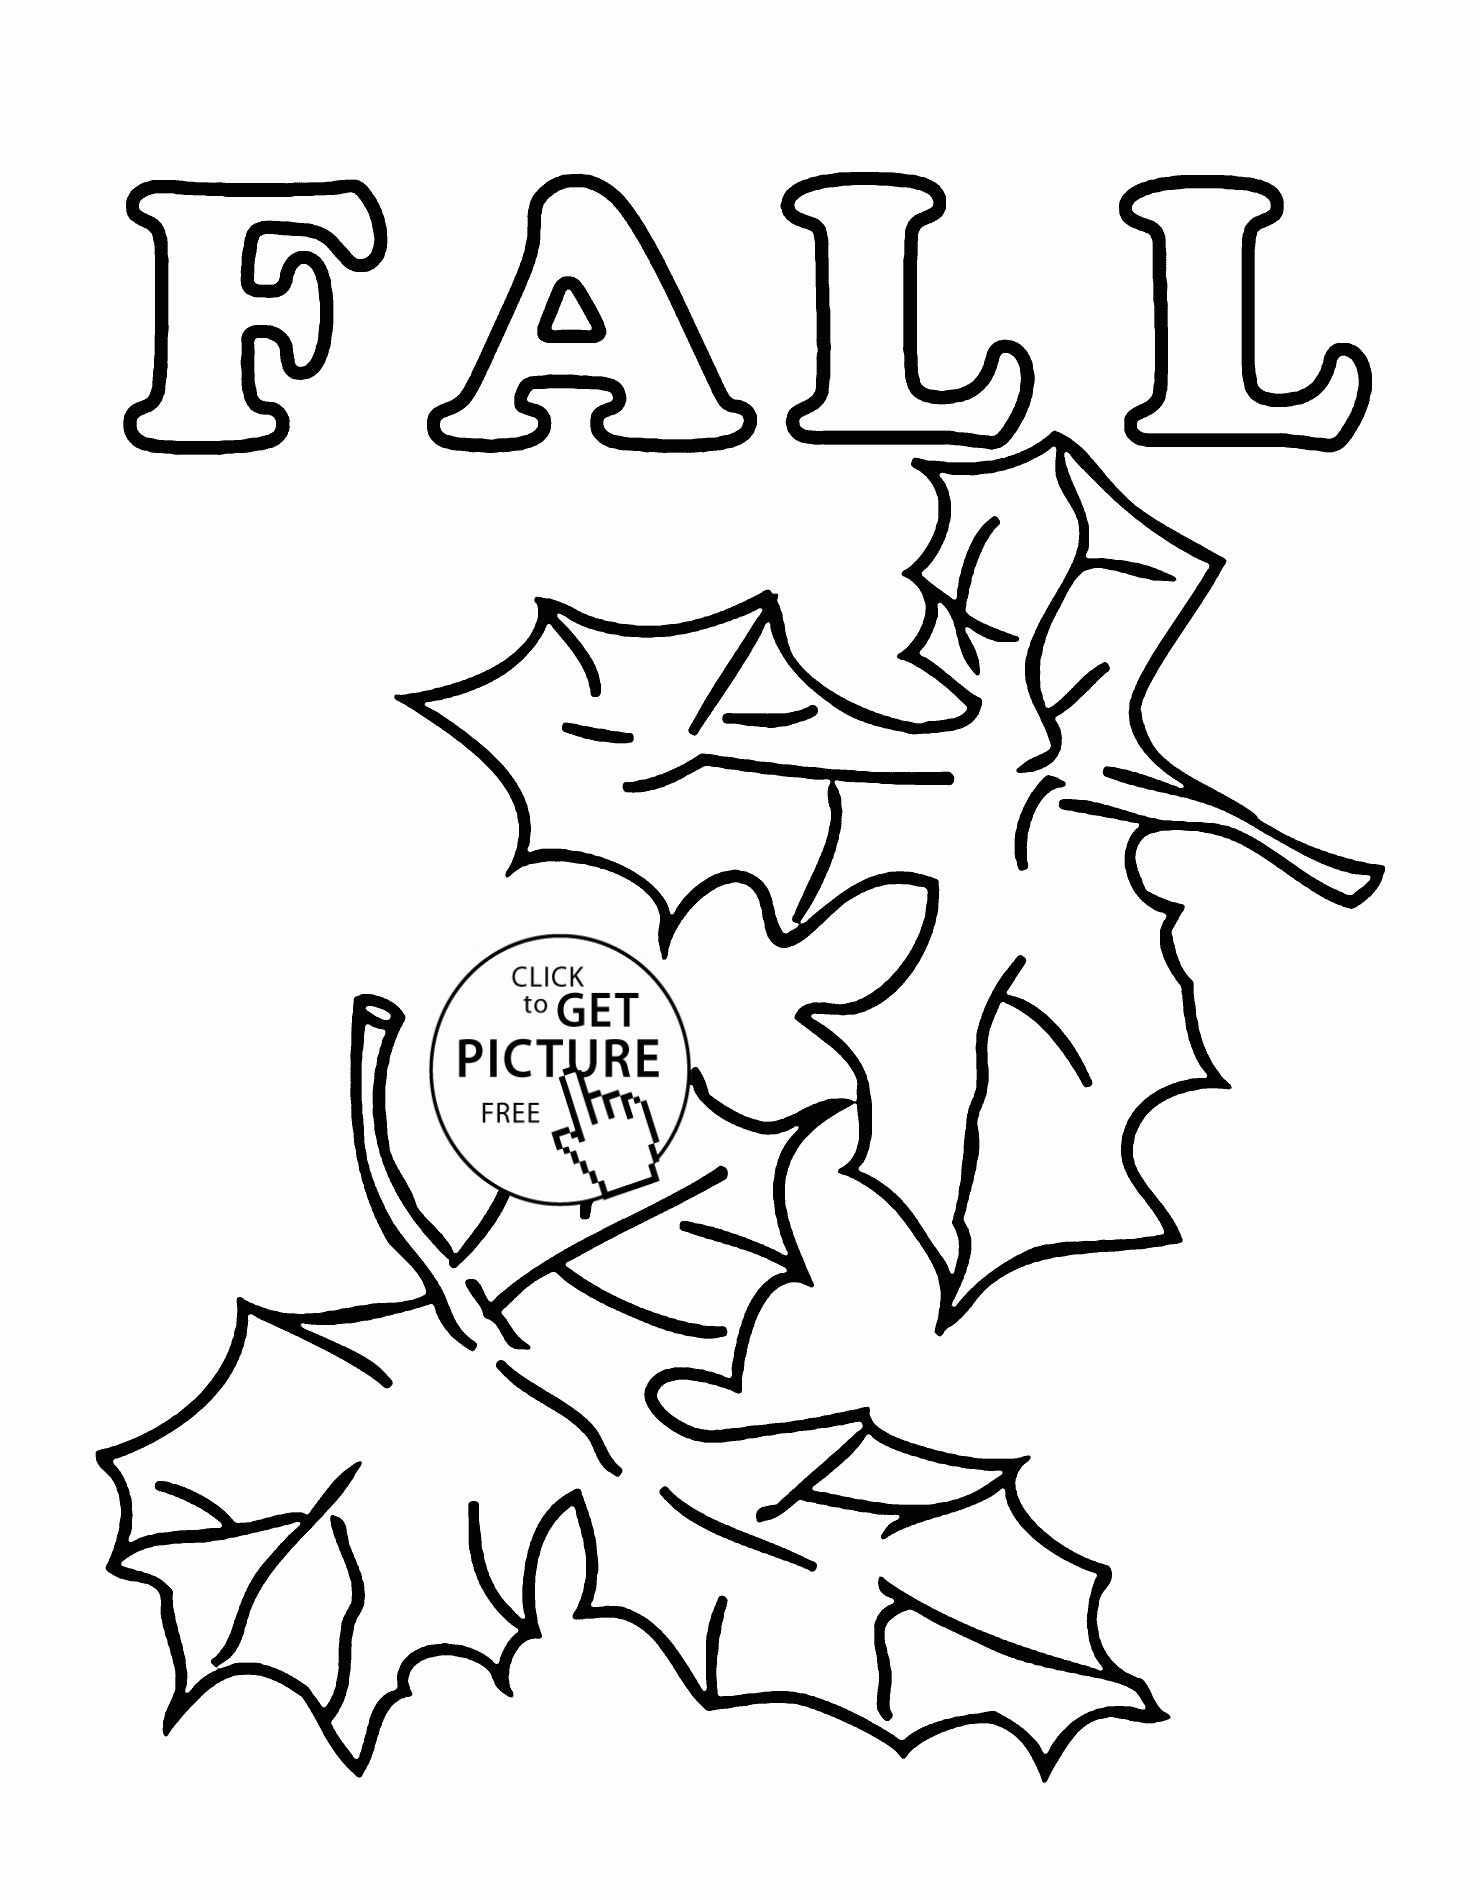 Fall Leaves Coloring Pages For Kids, Seasons Fall Printables Free - Free Printable Coloring Pages Fall Season